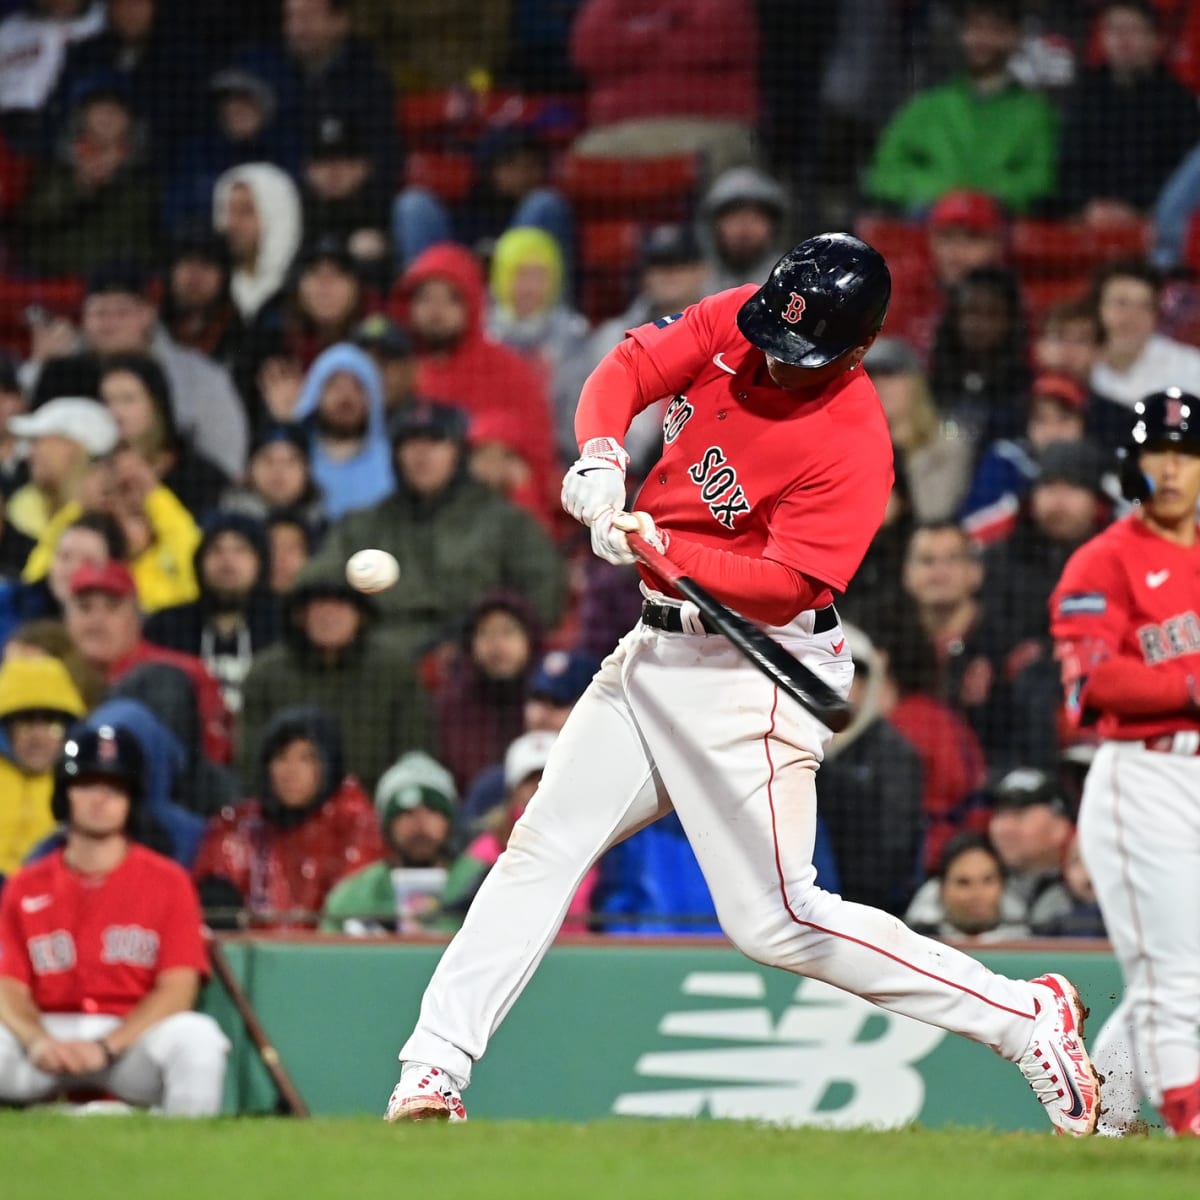 Boston Red Sox' Rafael Devers Continues Historical Dominance of Yankees'  Gerrit Cole - Fastball